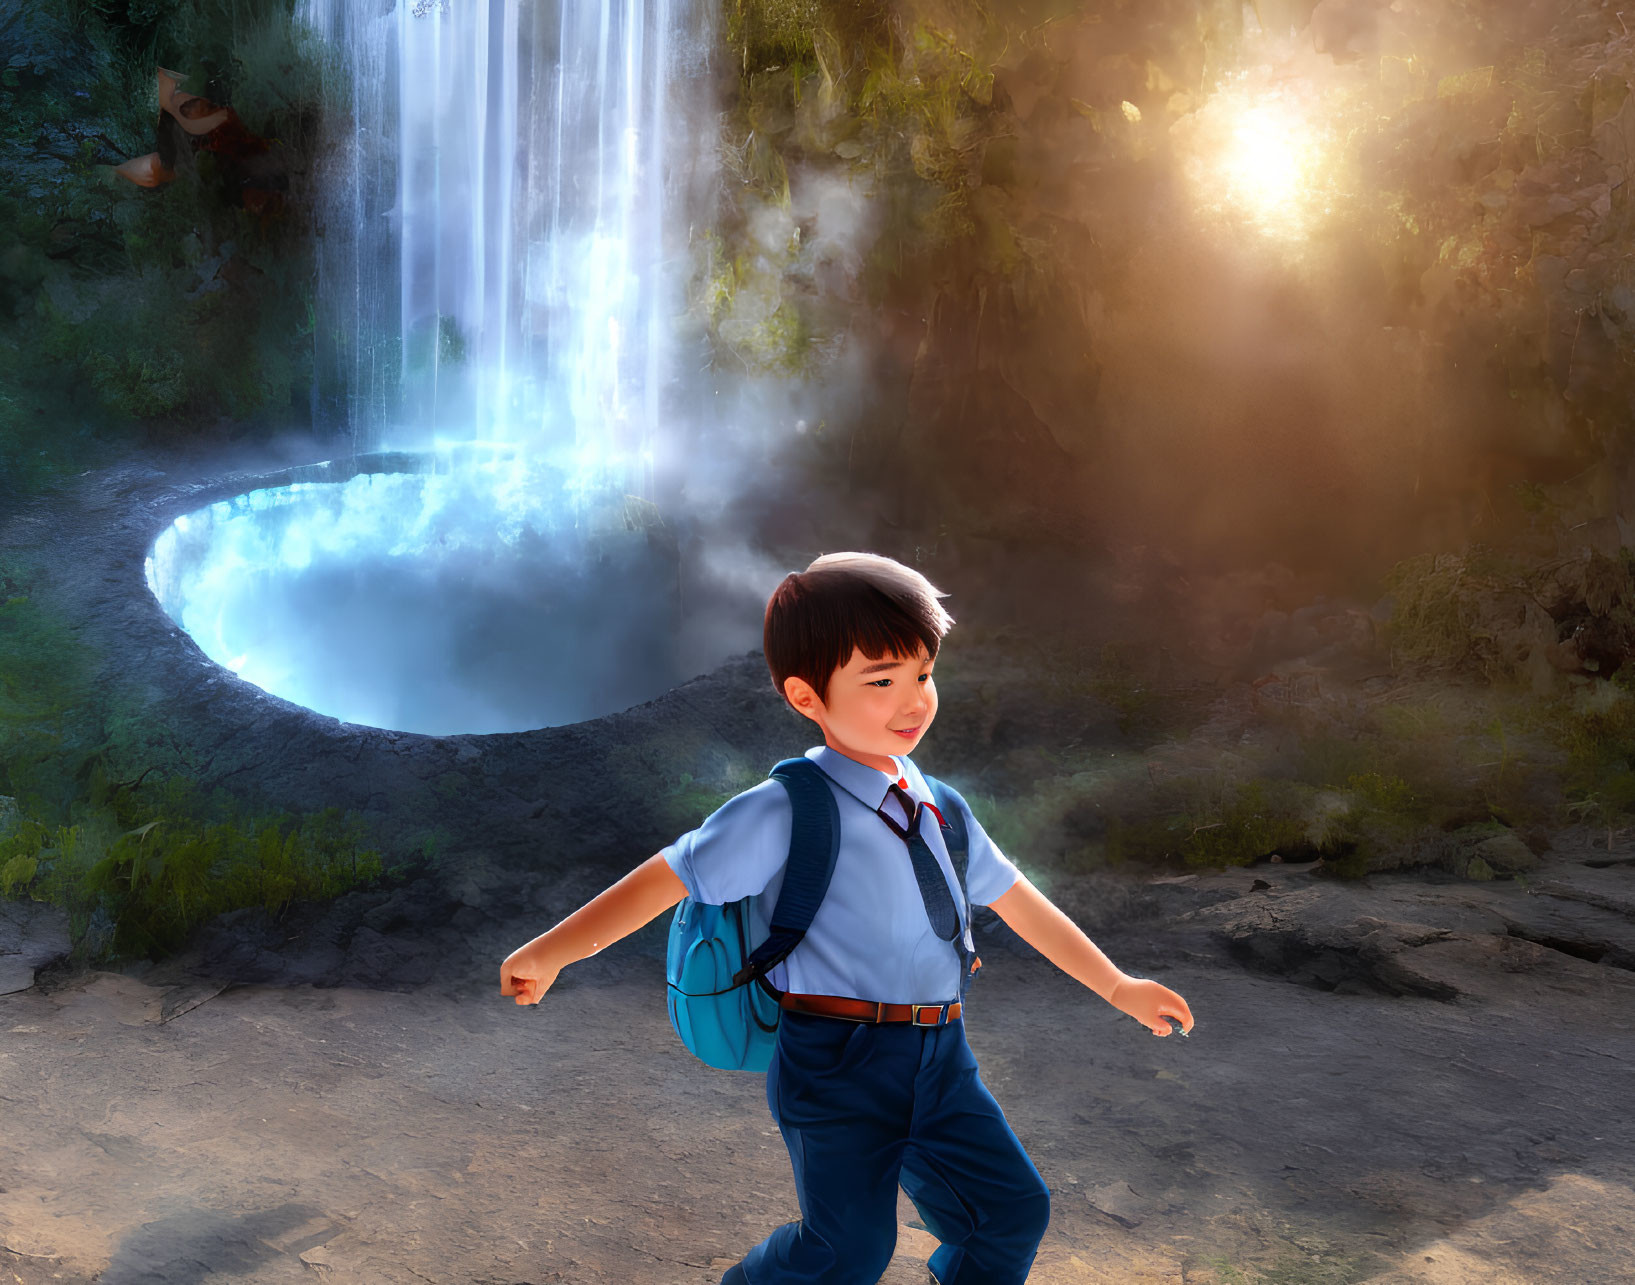 Young boy walking near scenic waterfall with sunlight filtering through mist